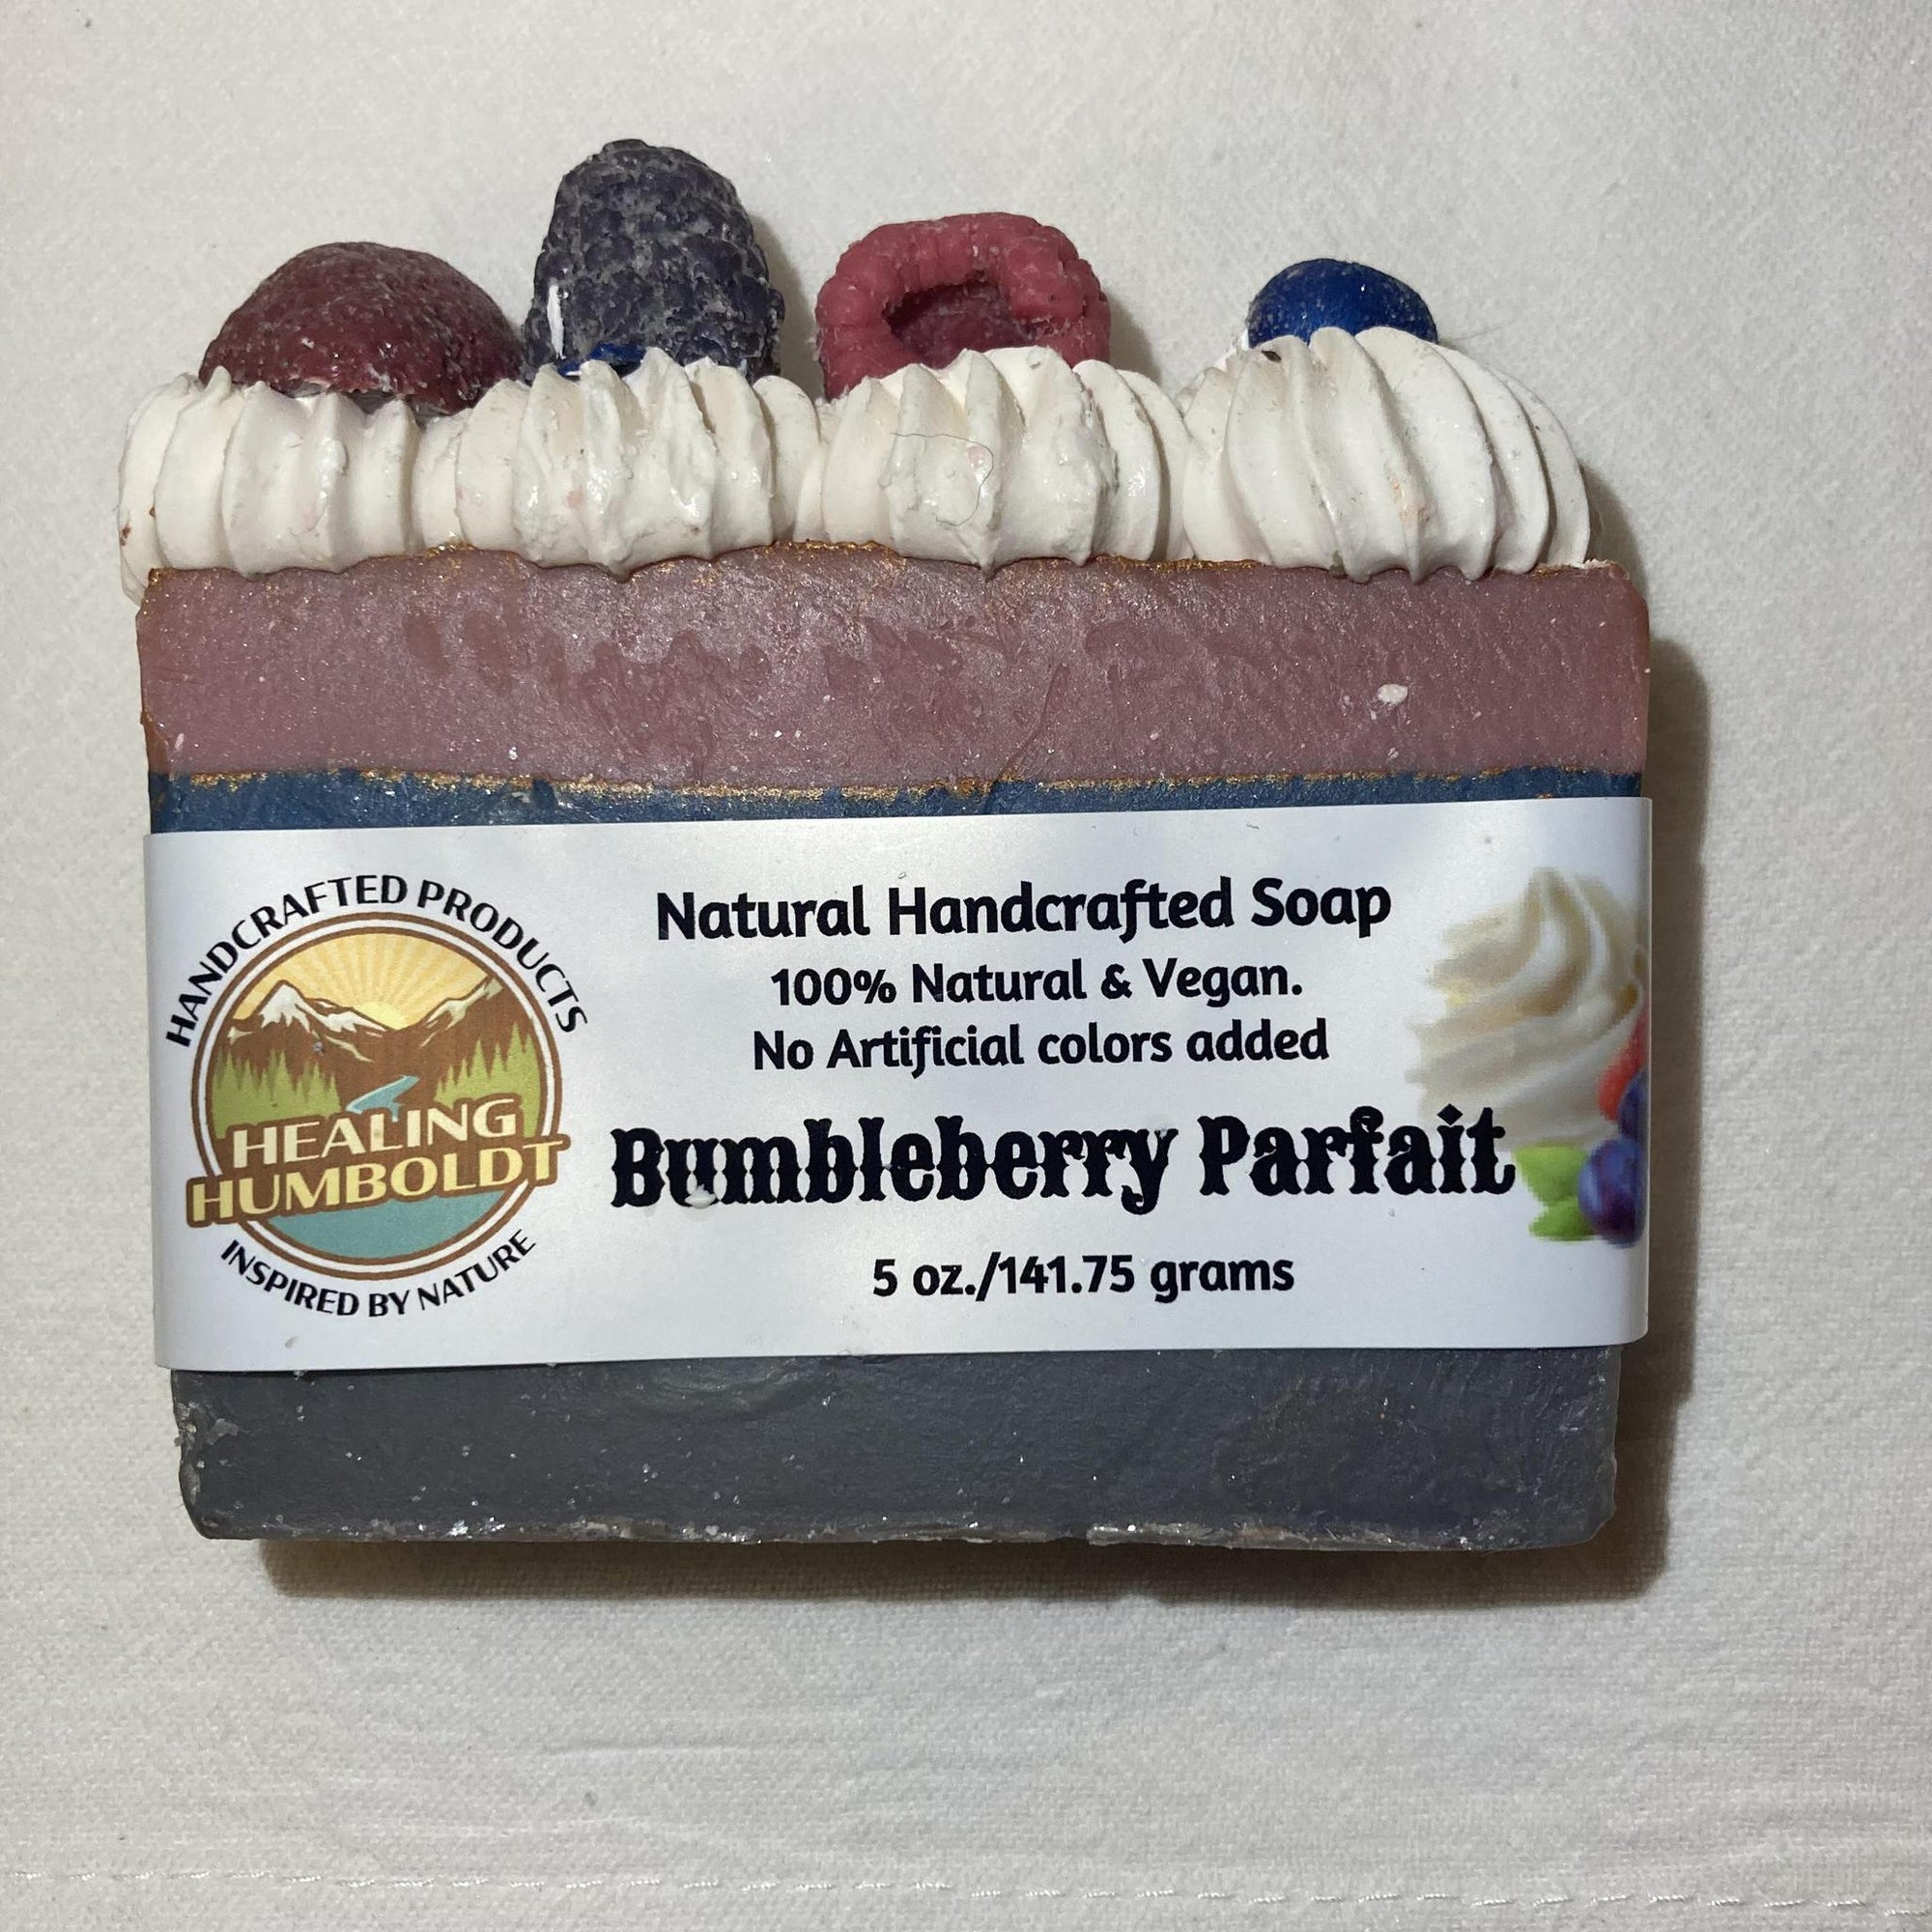 Healing Humboldt Handcrafted Soap | Bumbleberry Parfait